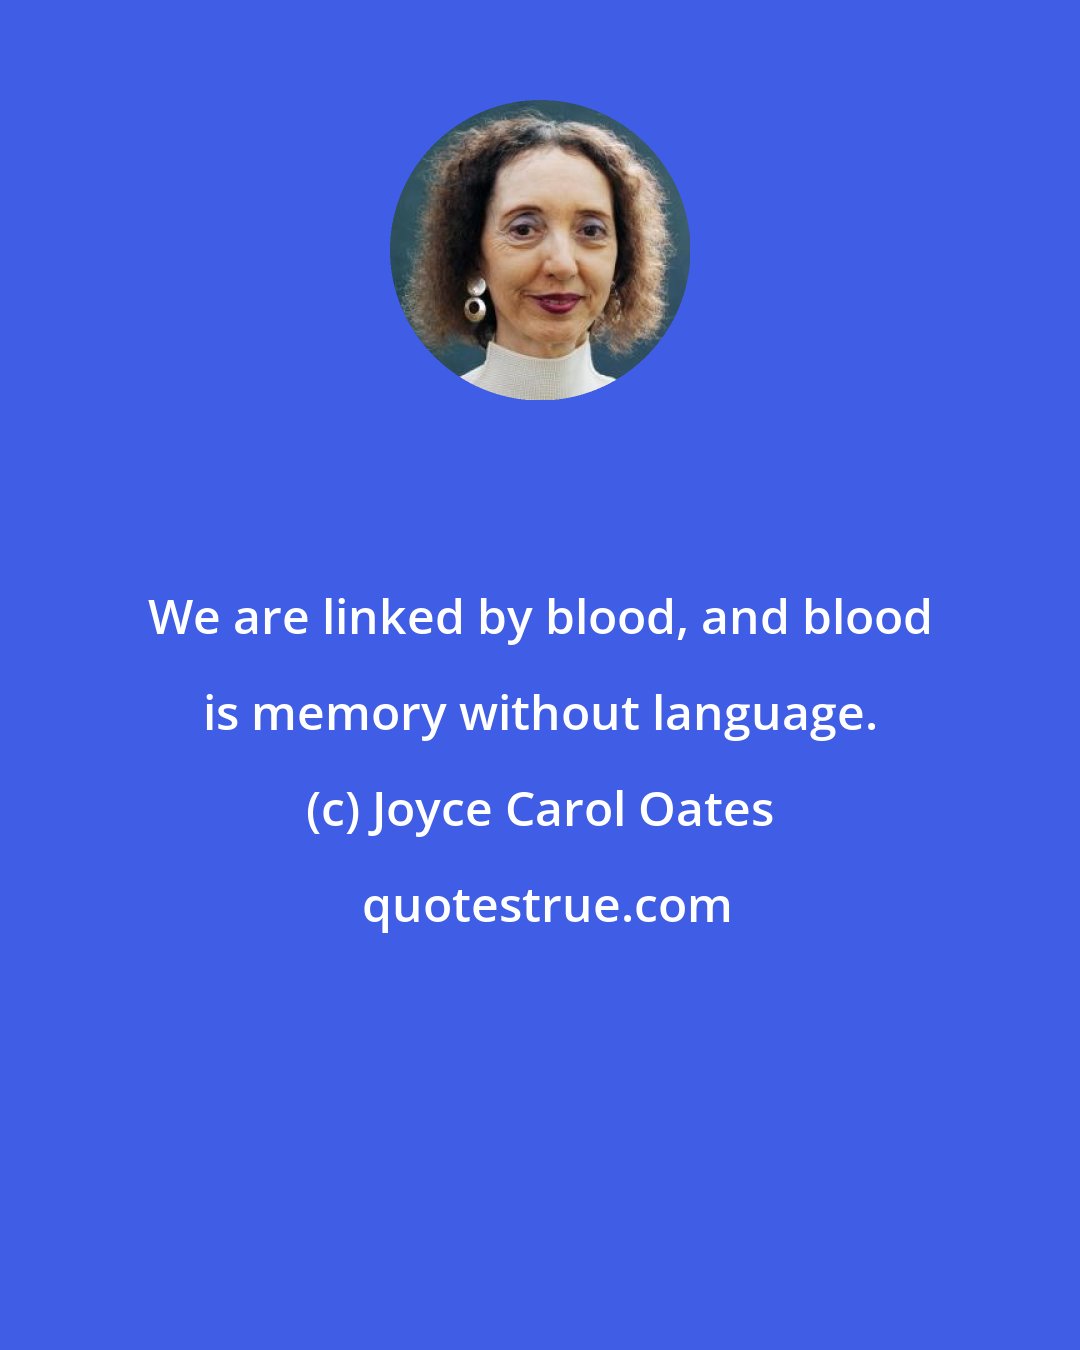 Joyce Carol Oates: We are linked by blood, and blood is memory without language.